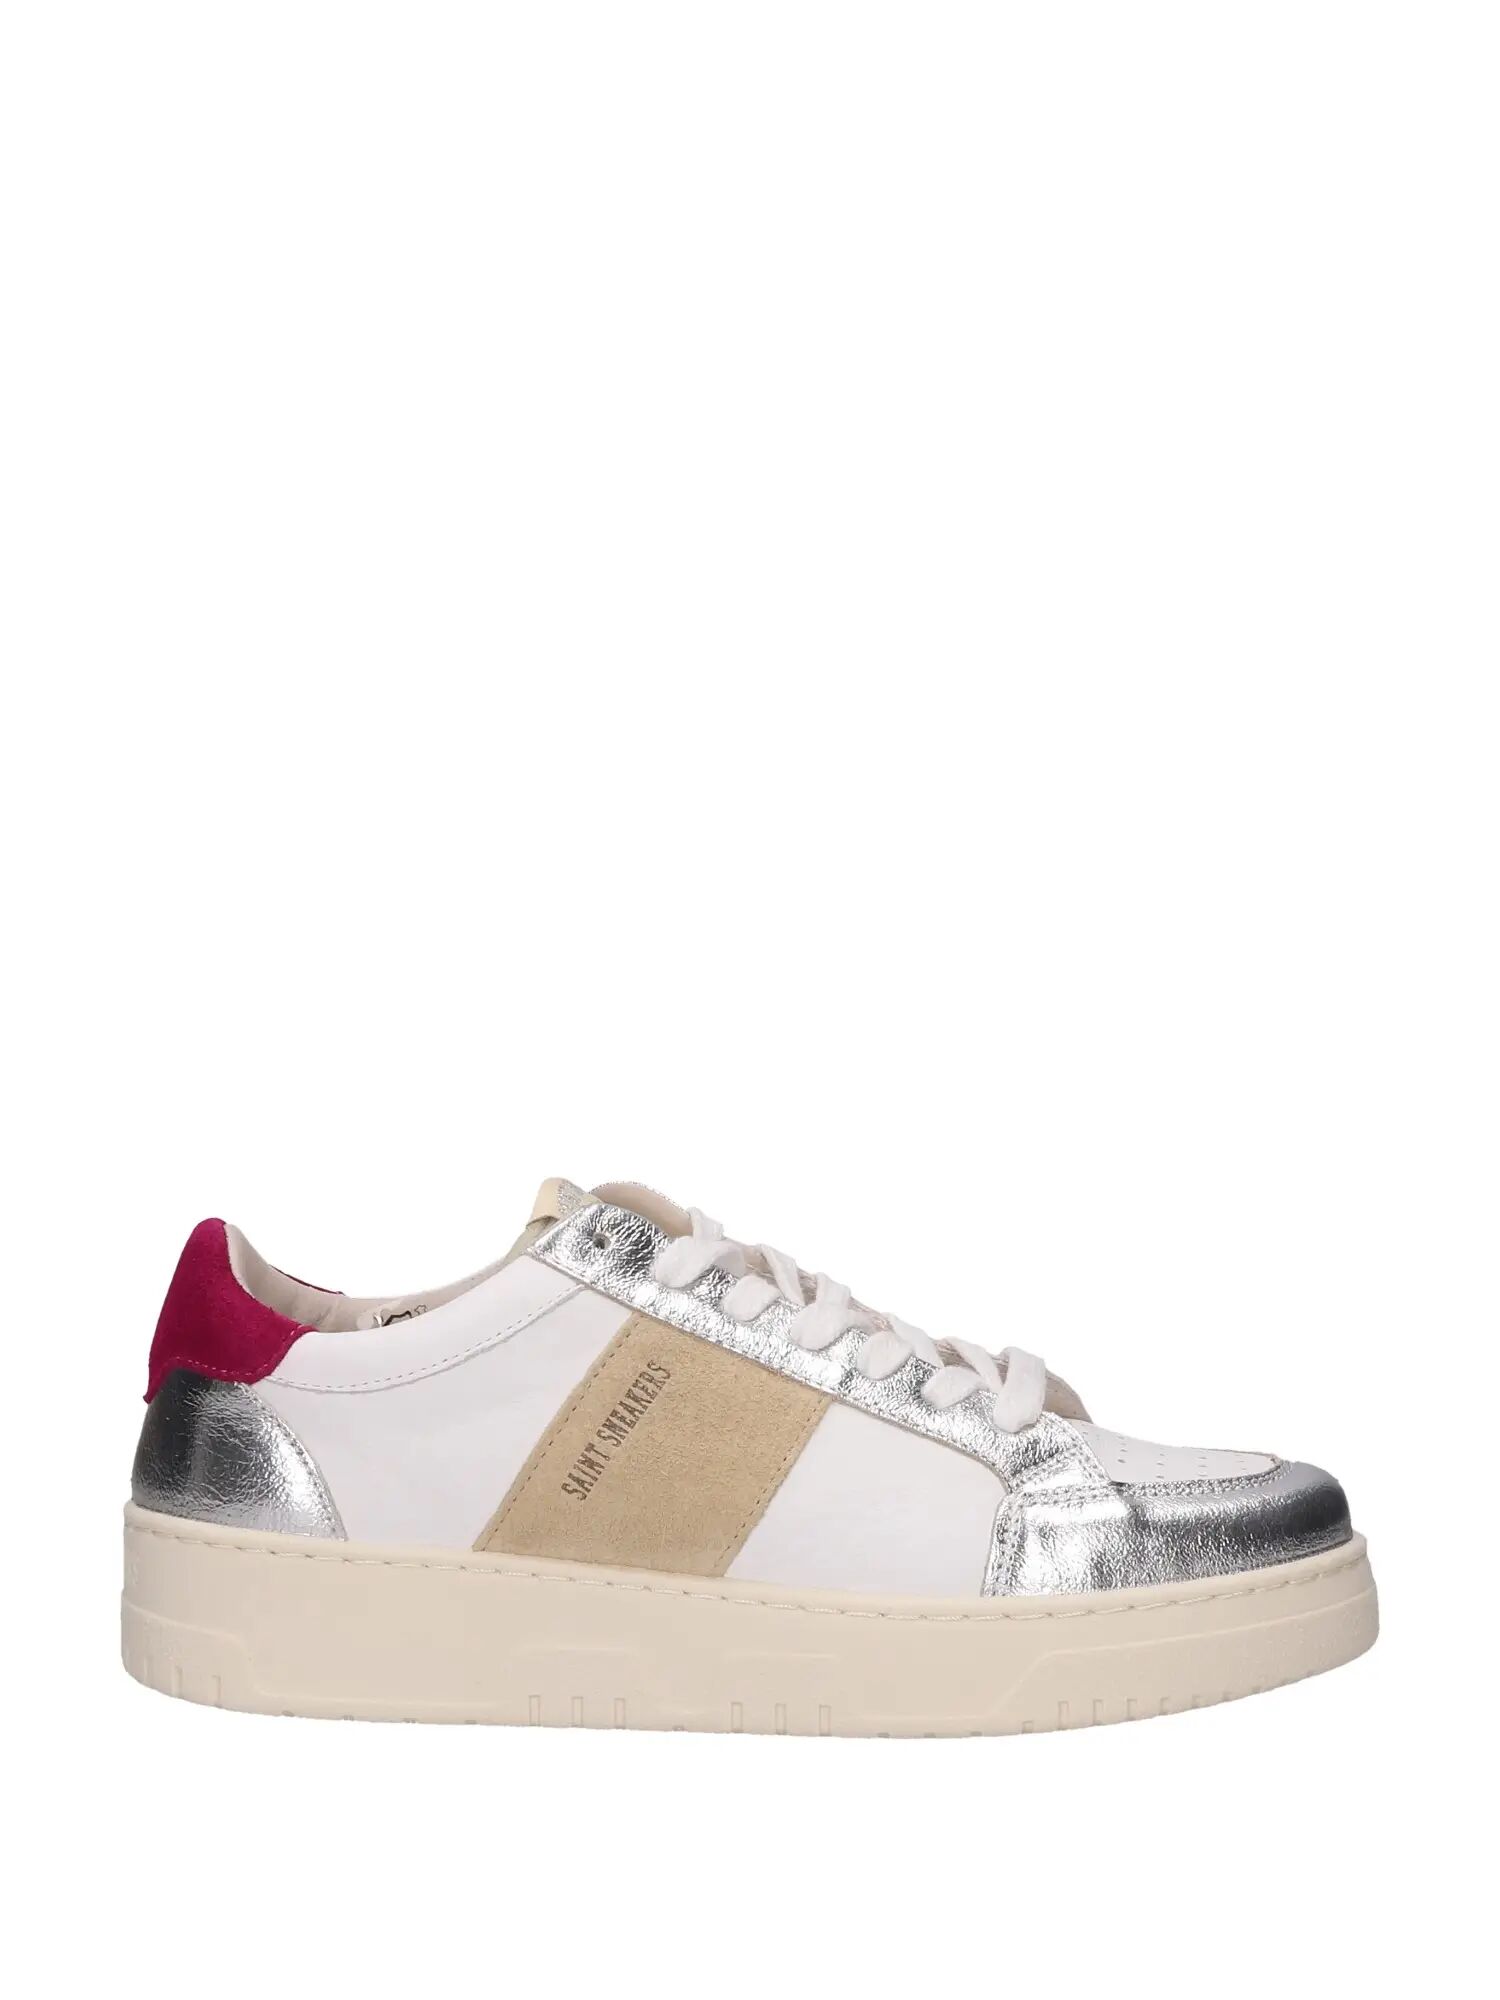 Saint Sneacker's Sneakers Bianche Donna BIANCO/ARGENTO 38